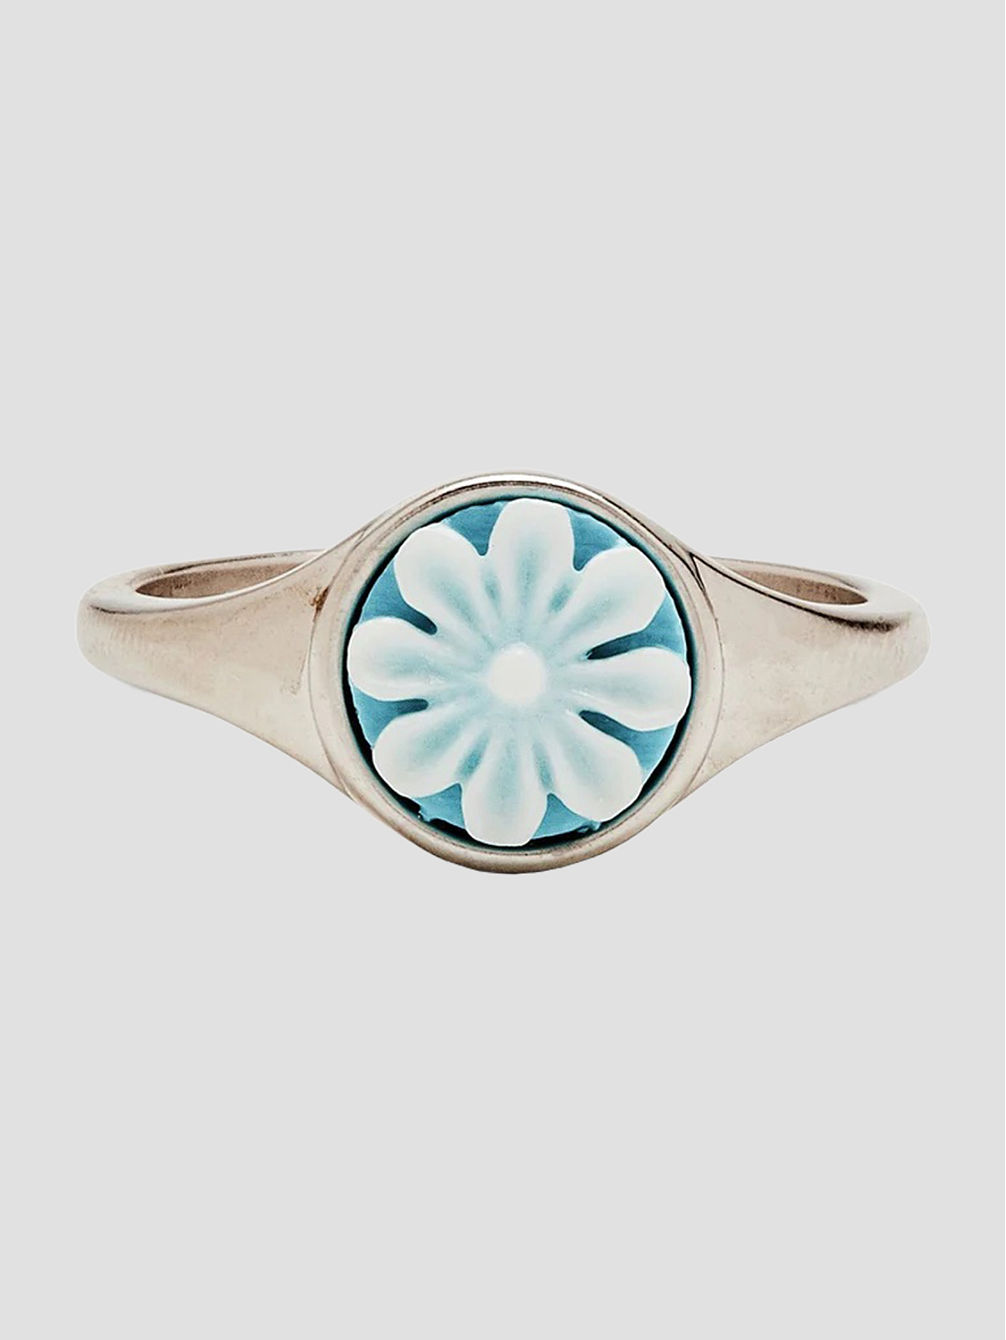 Cameo 7 Ring